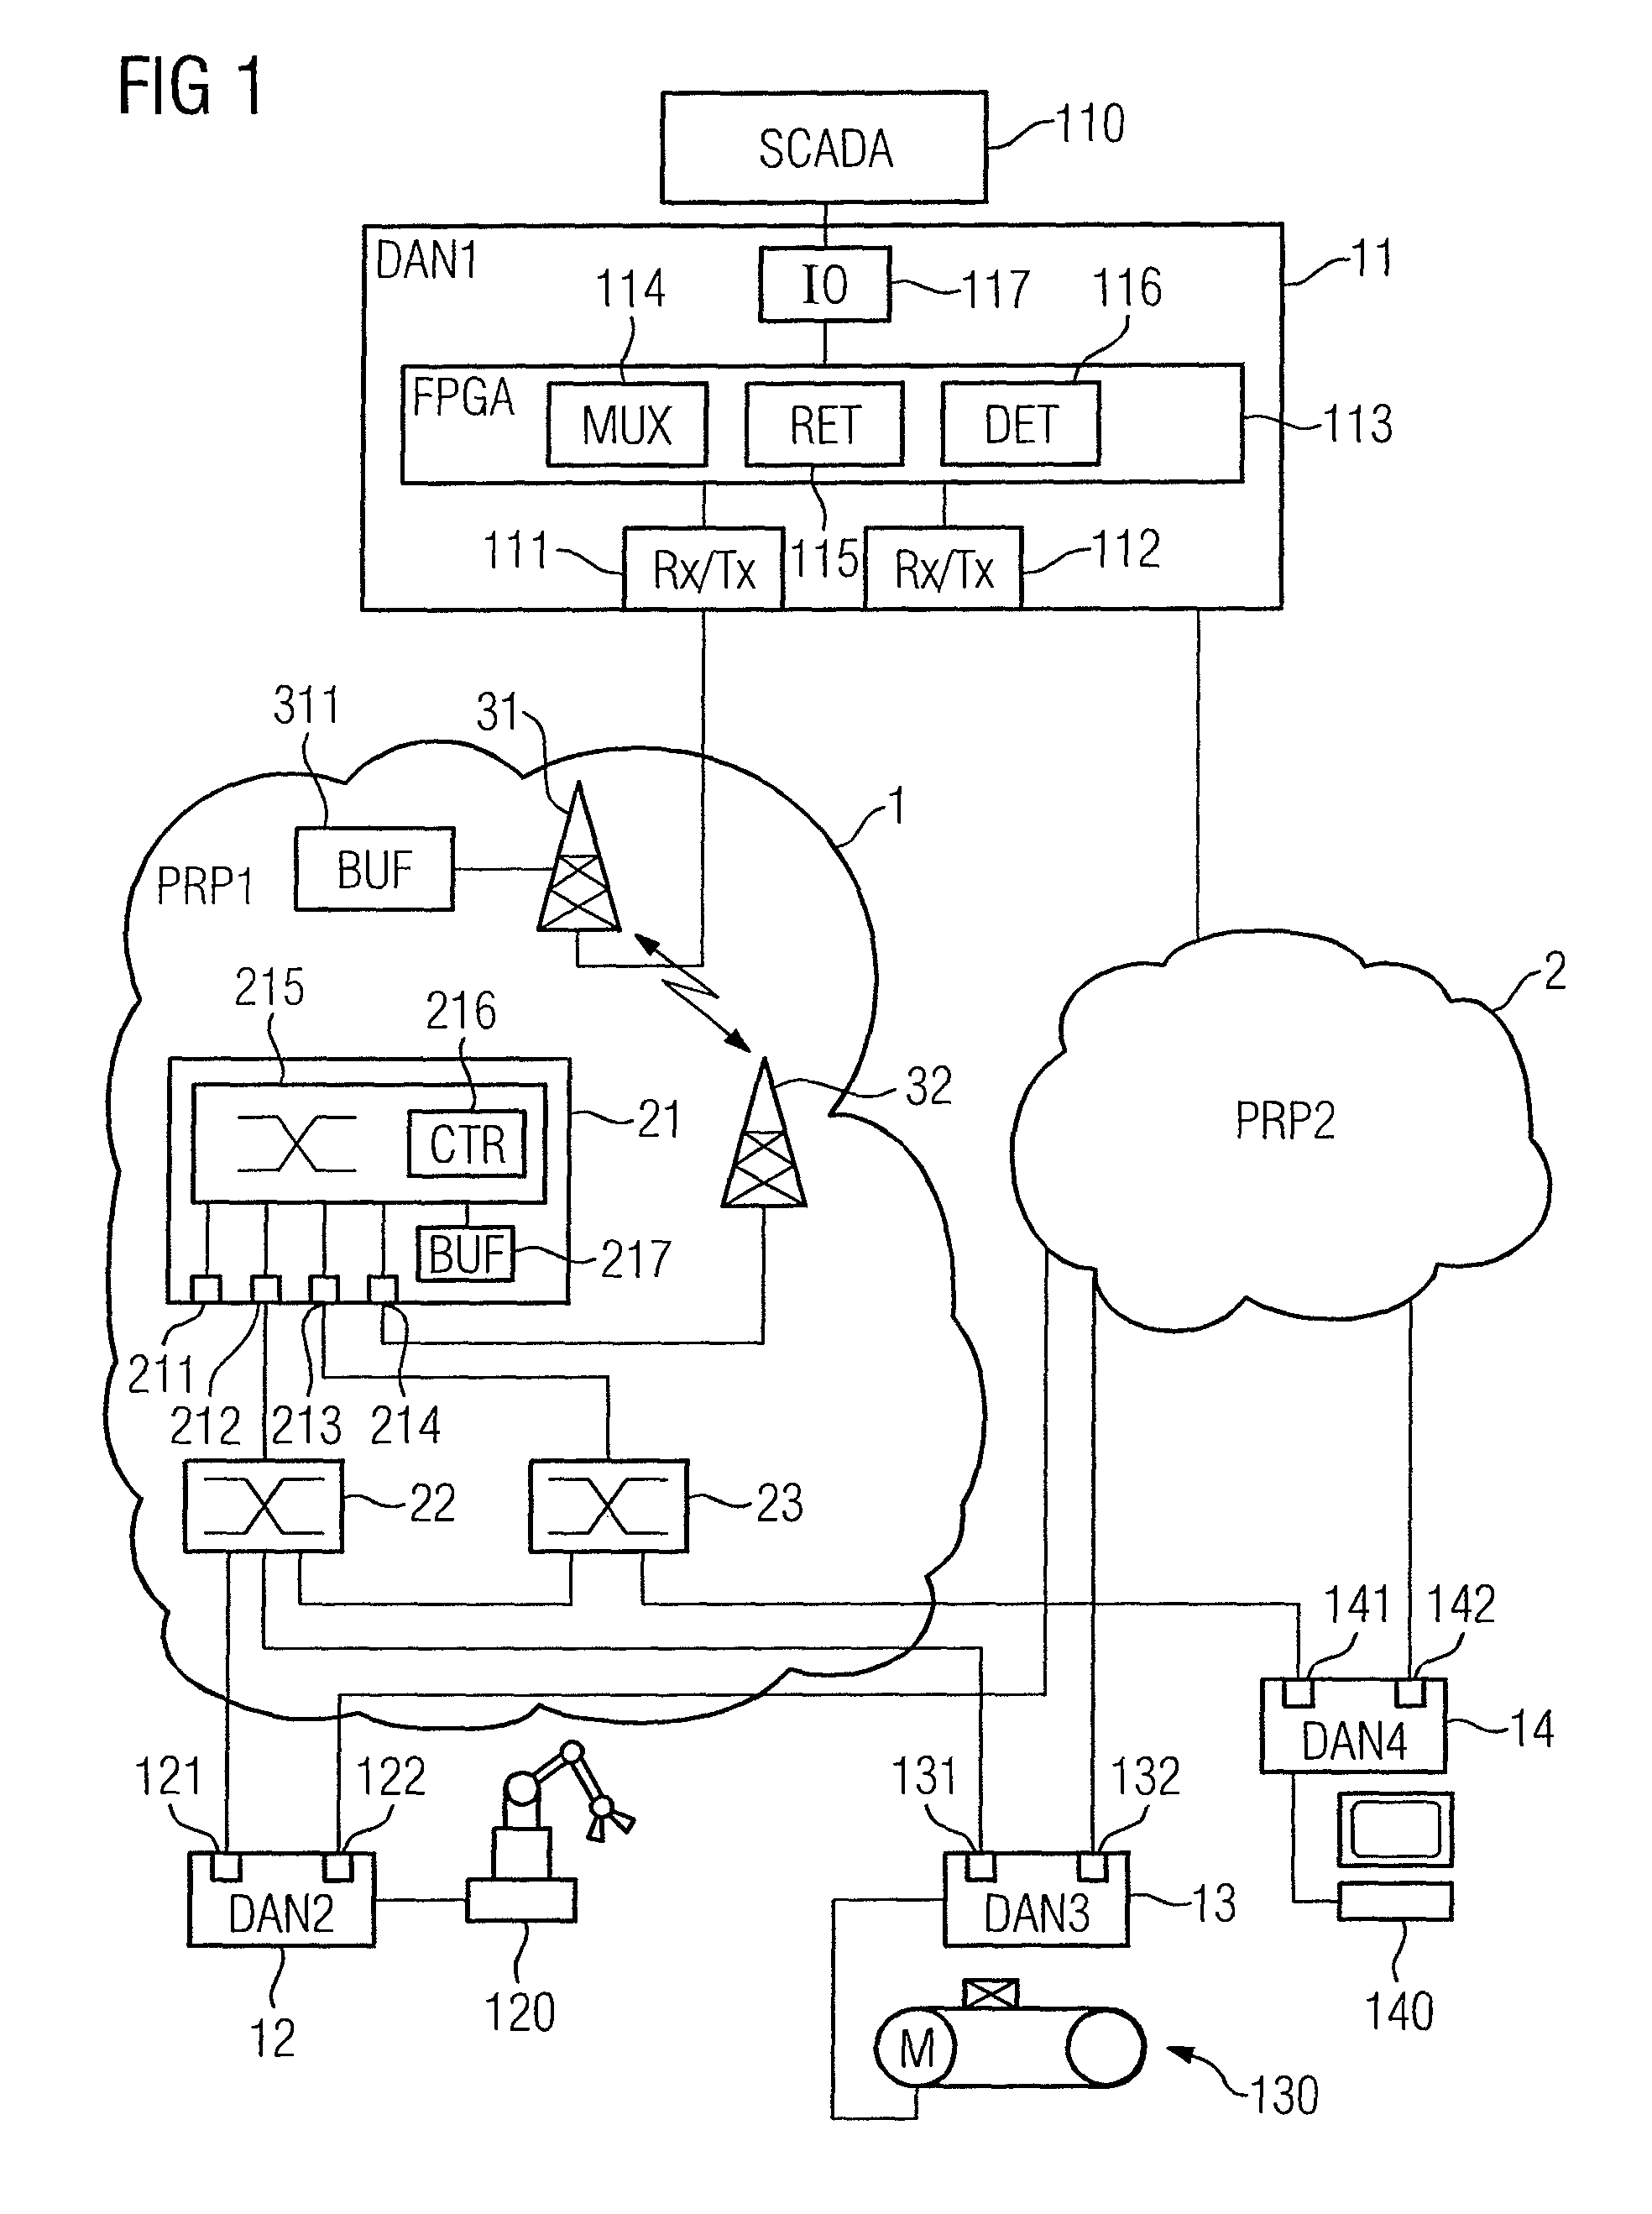 Redundantly operable industrial communication system and method for operation thereof